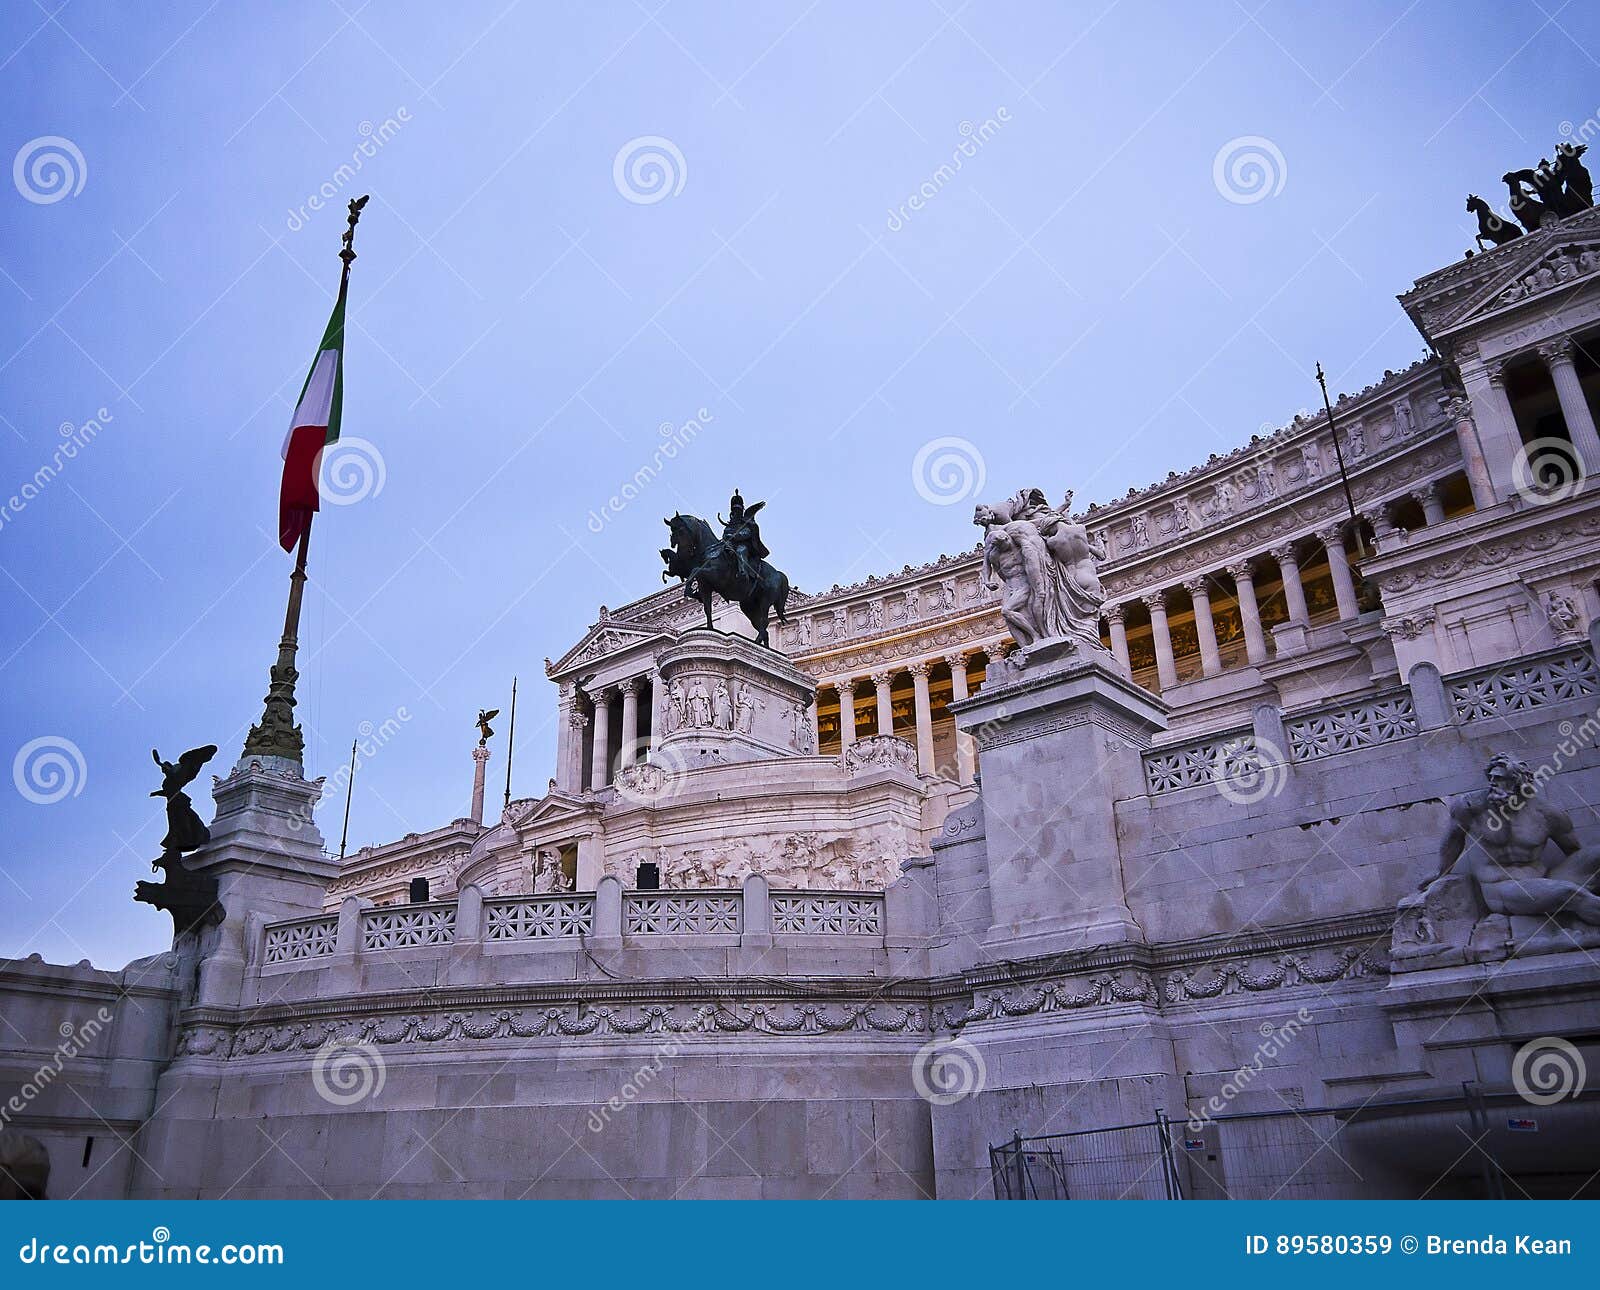 The Monument  To King Vittorio Emanuel Known As The Wedding  